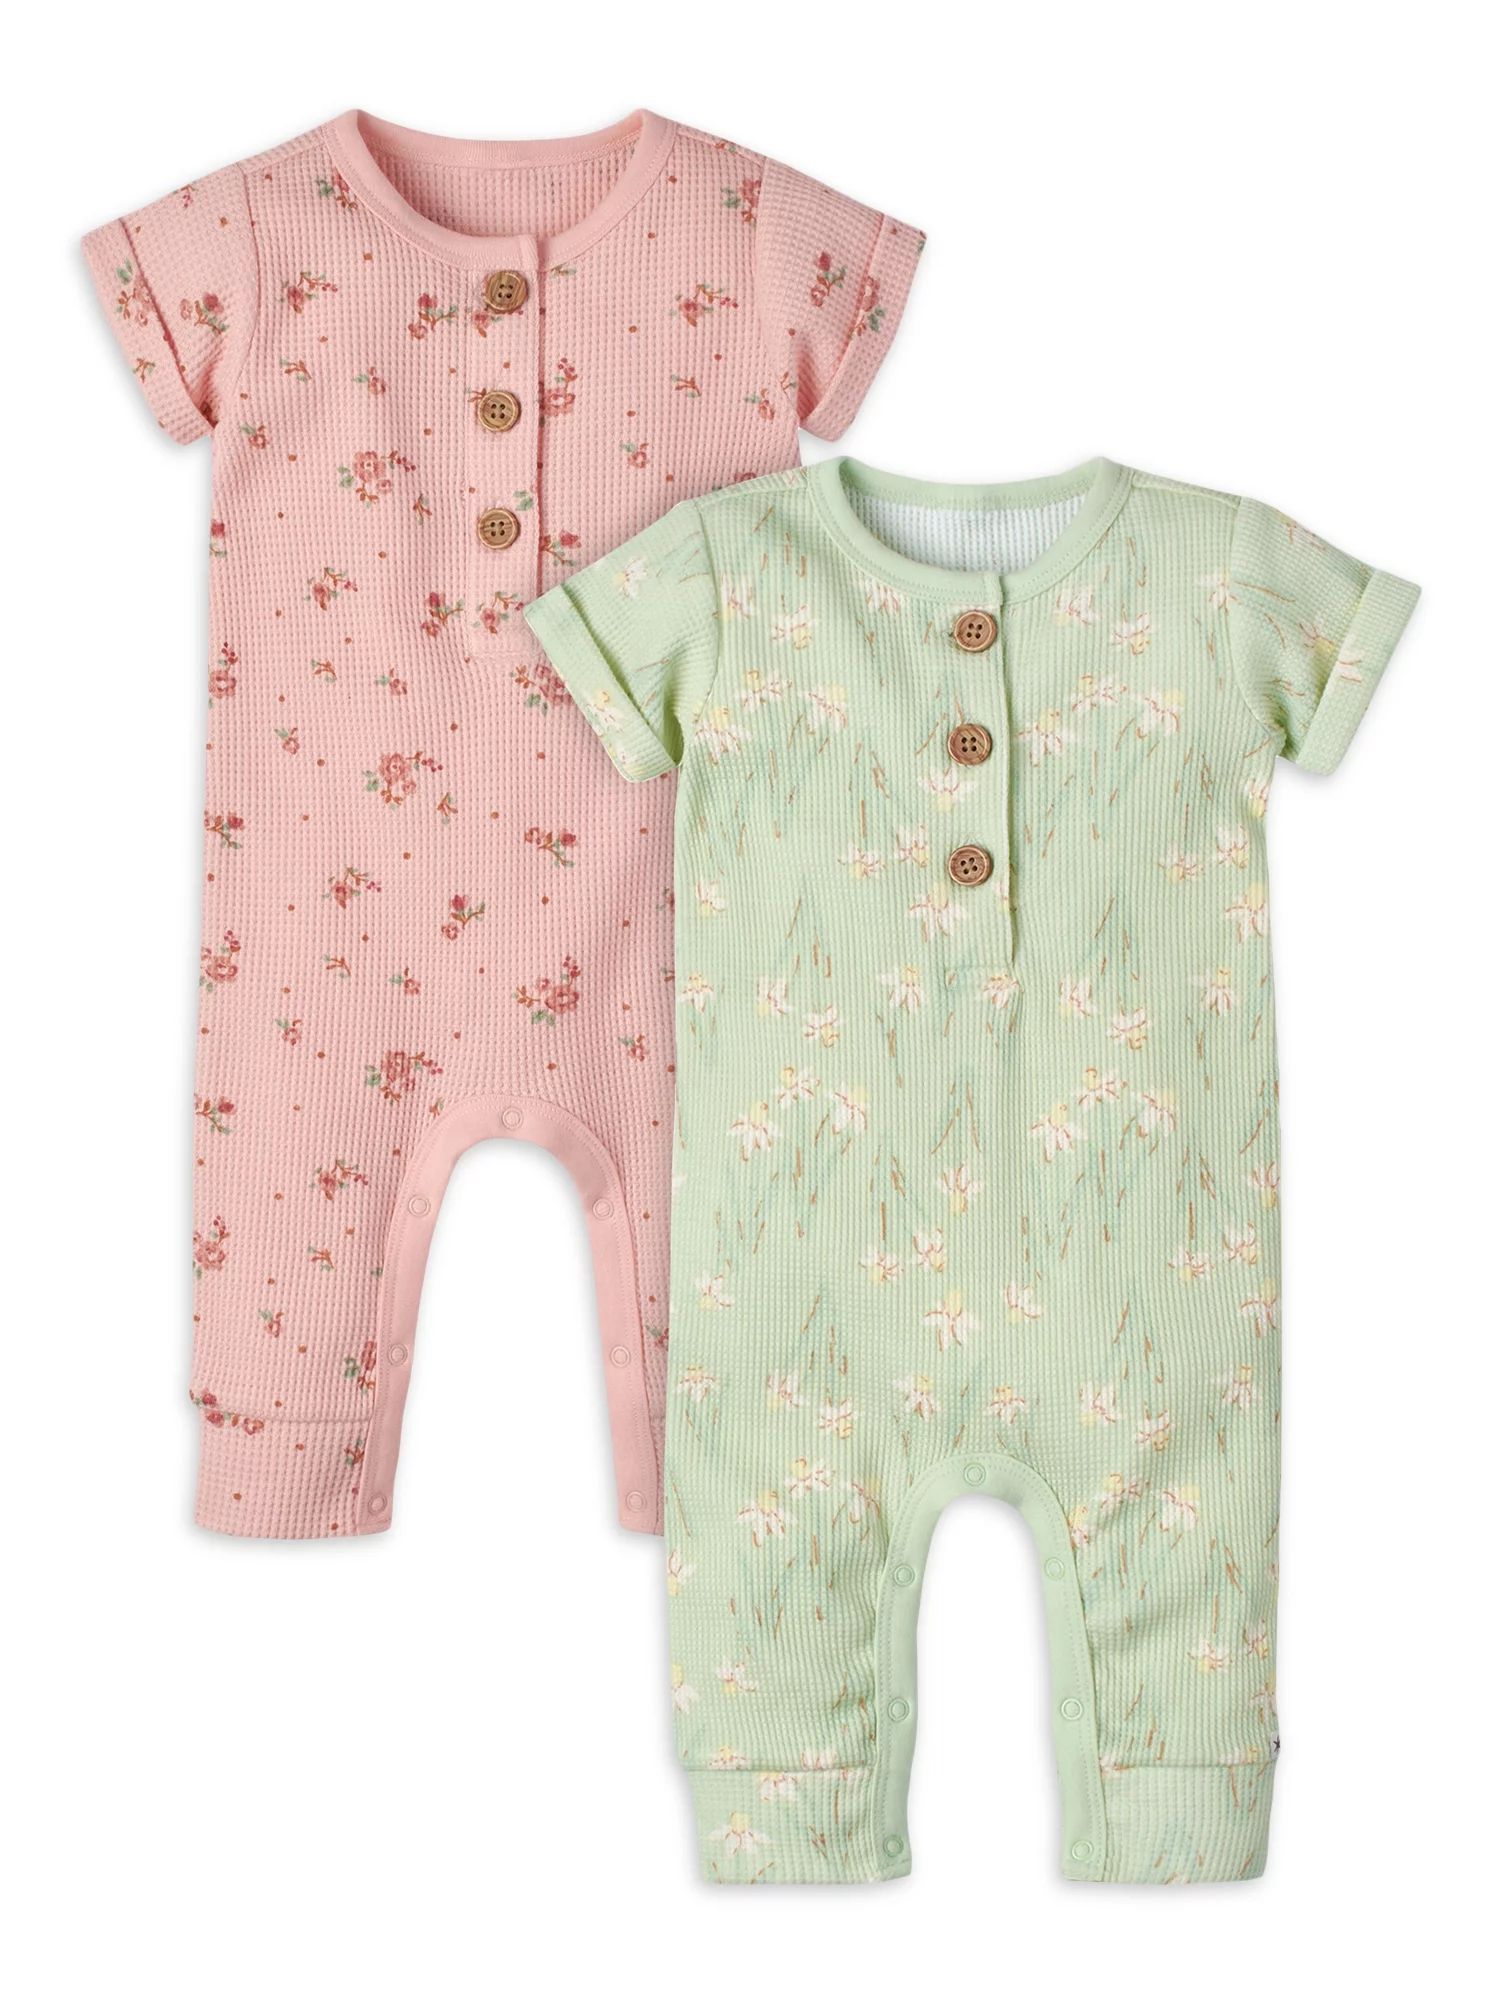 Modern Moments by Gerber Baby Girl Waffle Romper, 2-Pack, Sizes 0/3 -24 Months | Walmart (US)